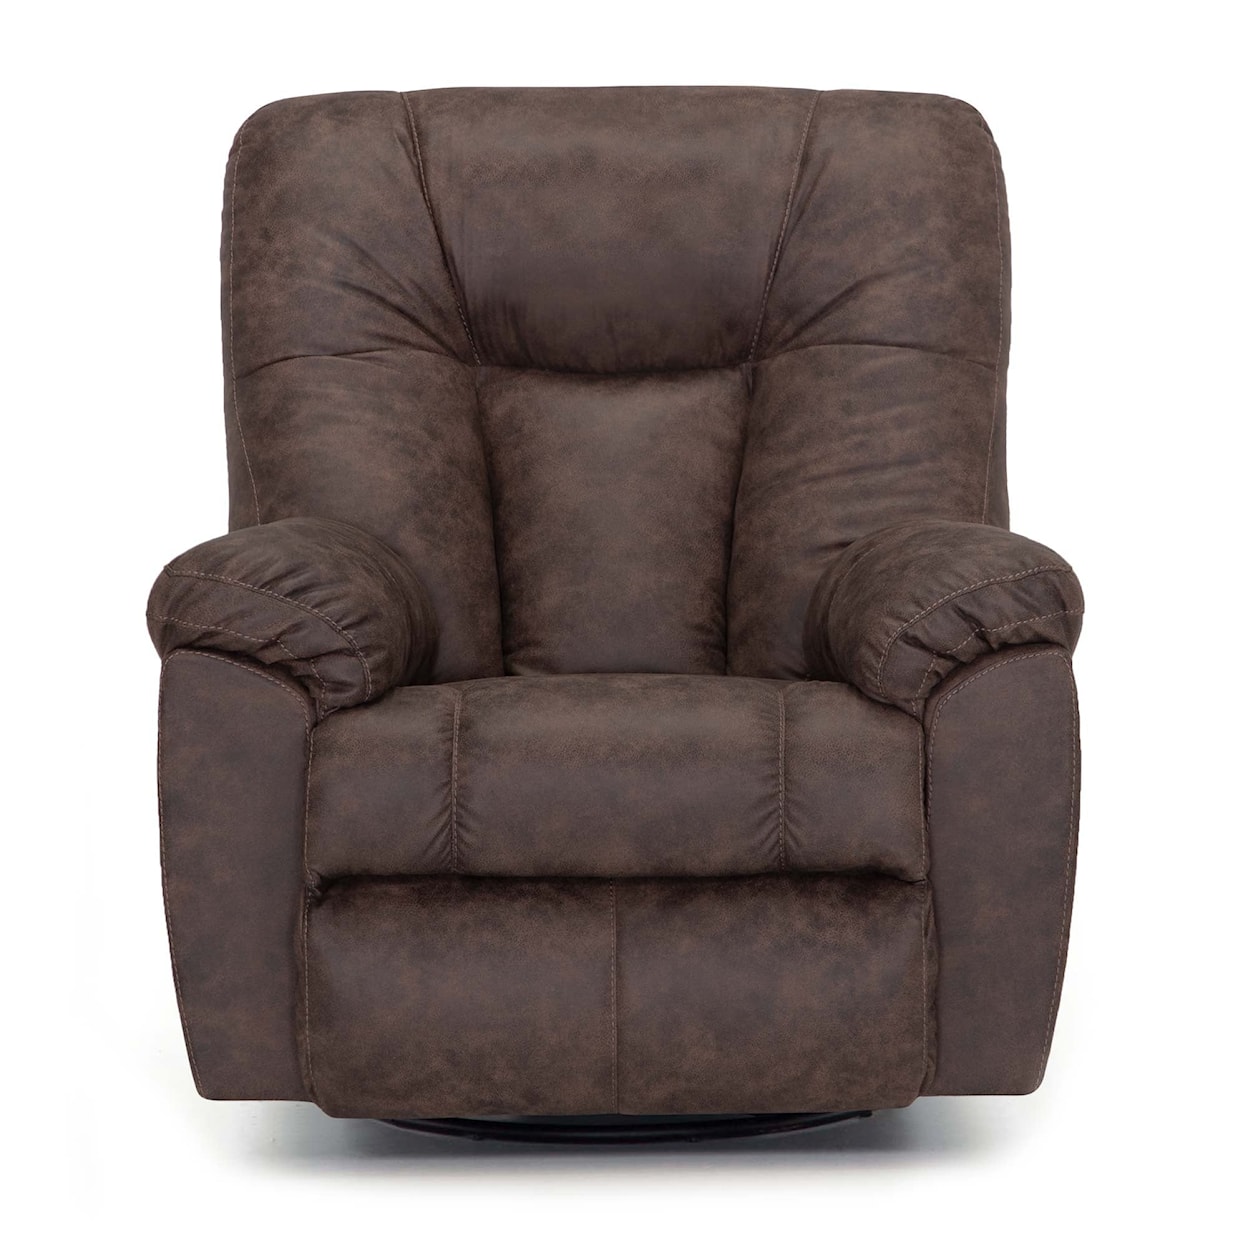 Franklin Recliners CONWAY SWIVEL COFFEE RECLINER |